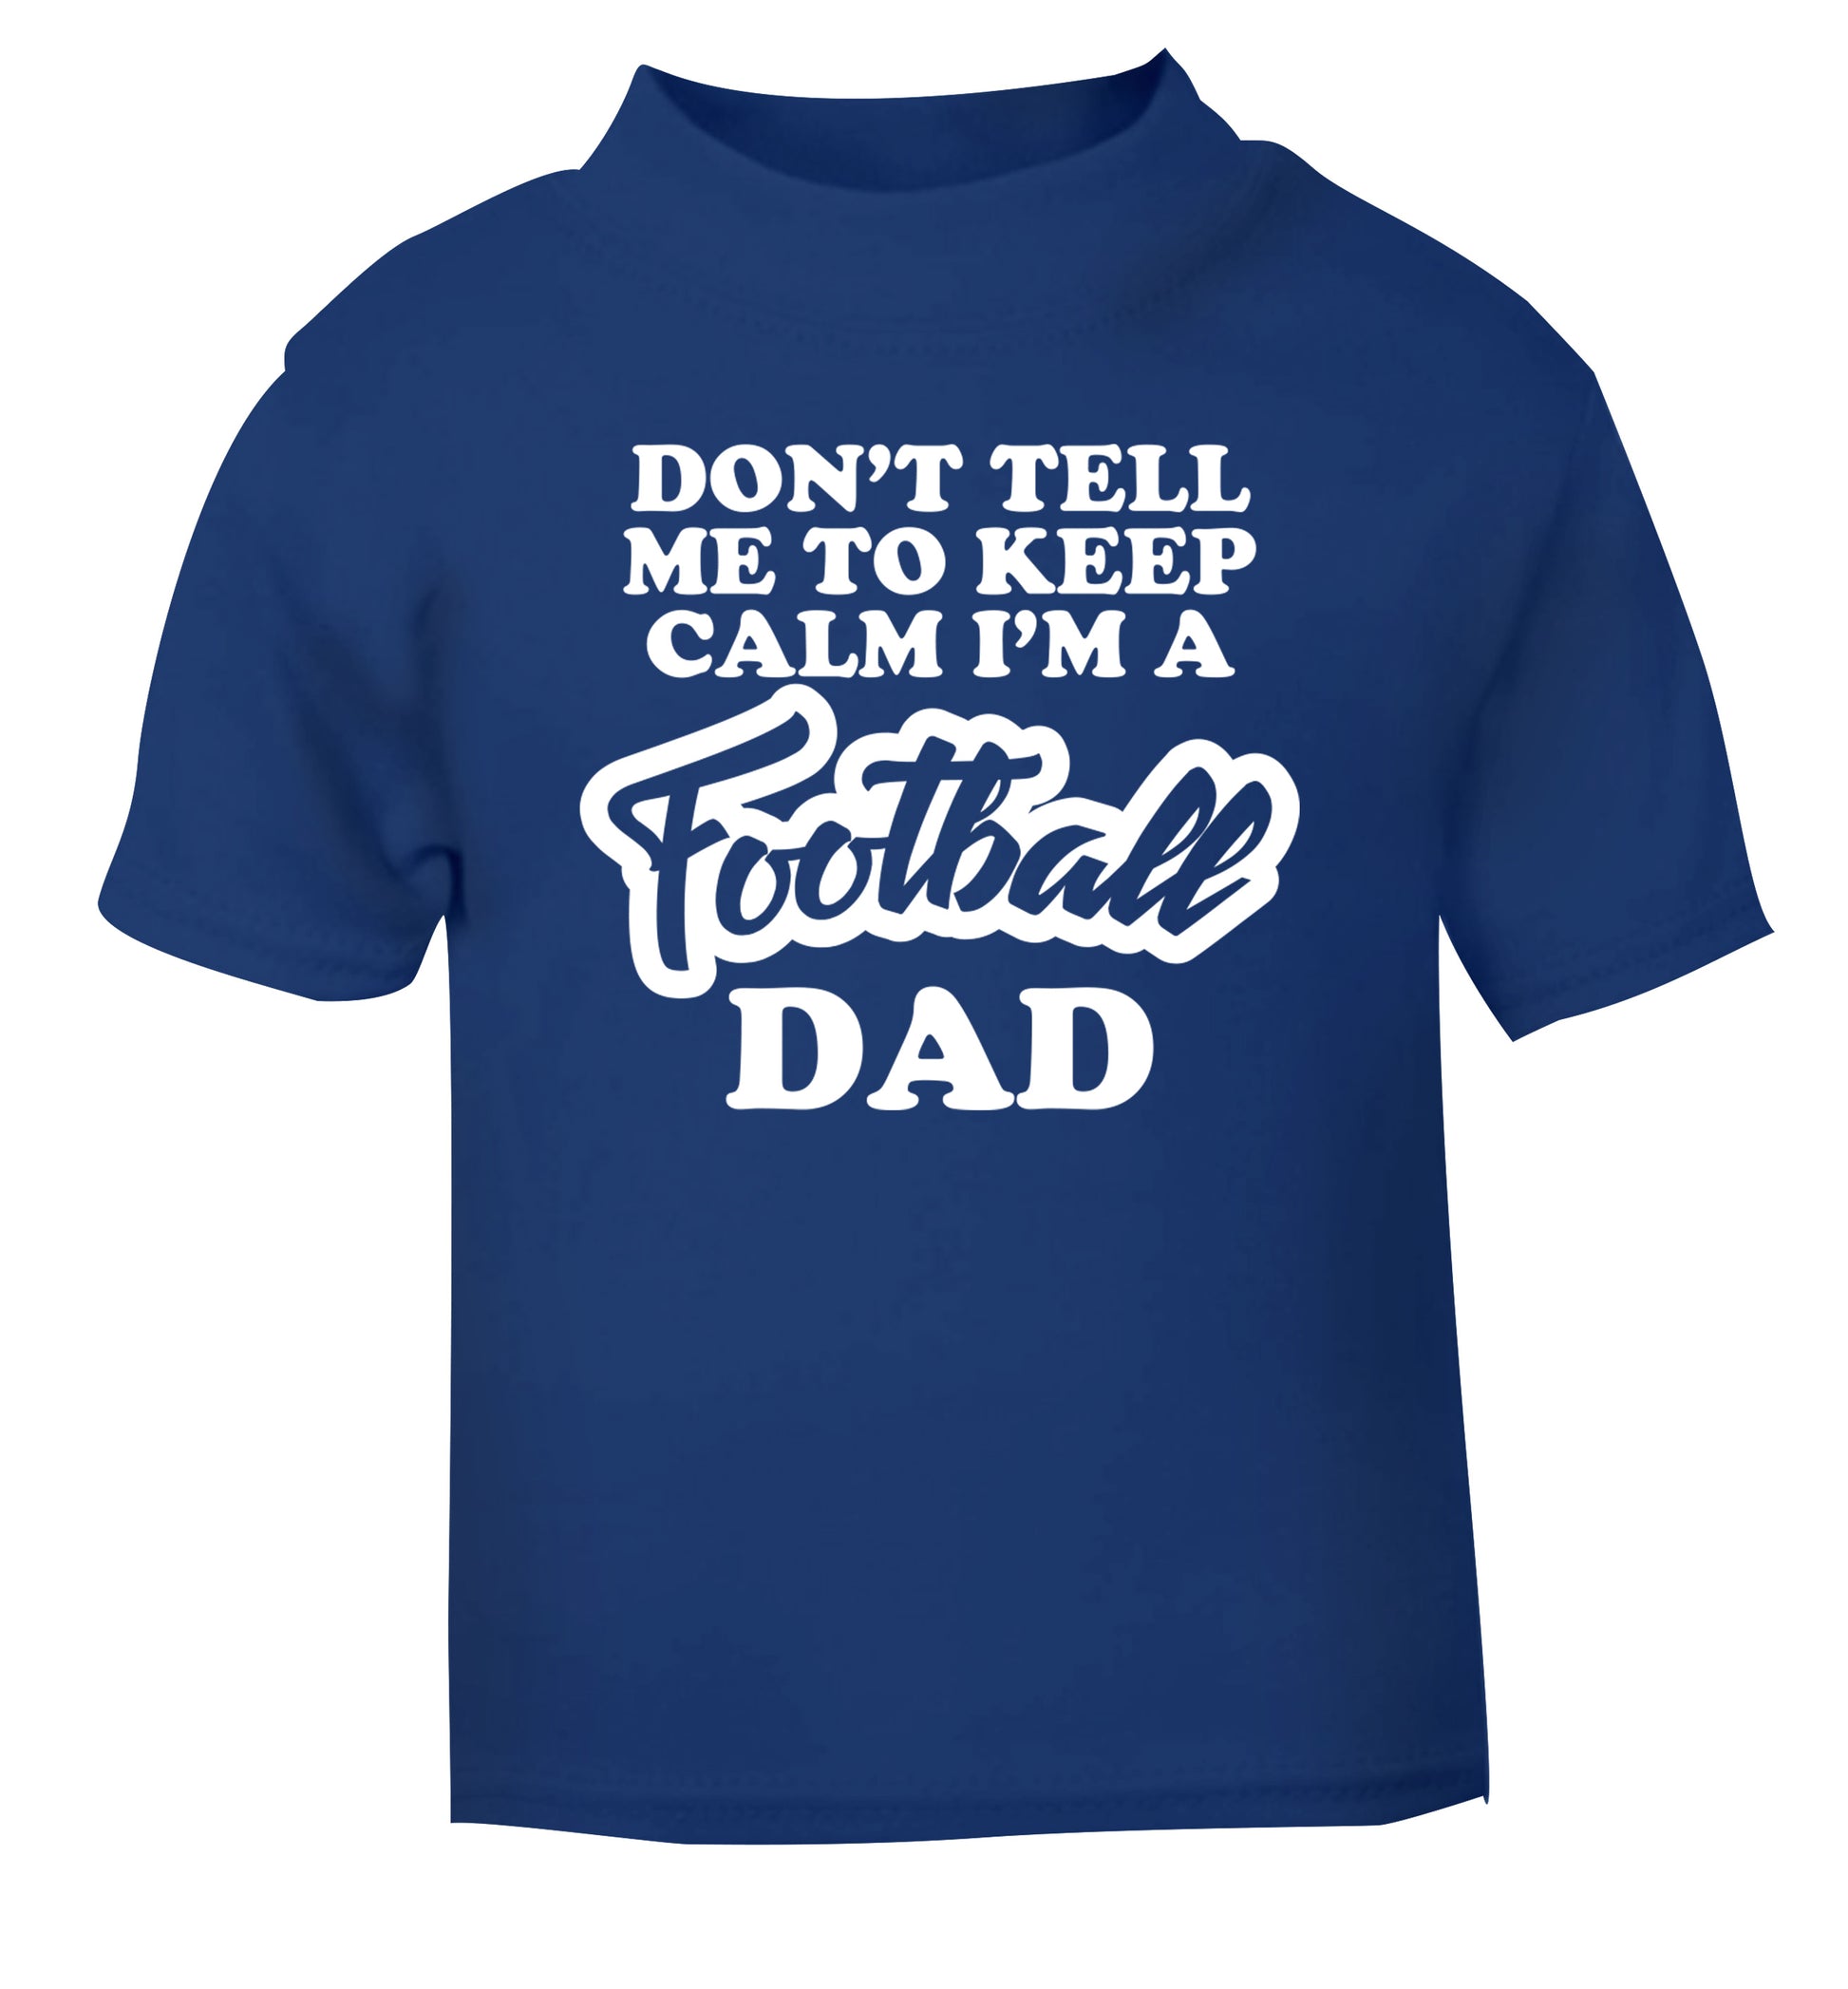 Don't tell me to keep calm I'm a football grandad blue Baby Toddler Tshirt 2 Years